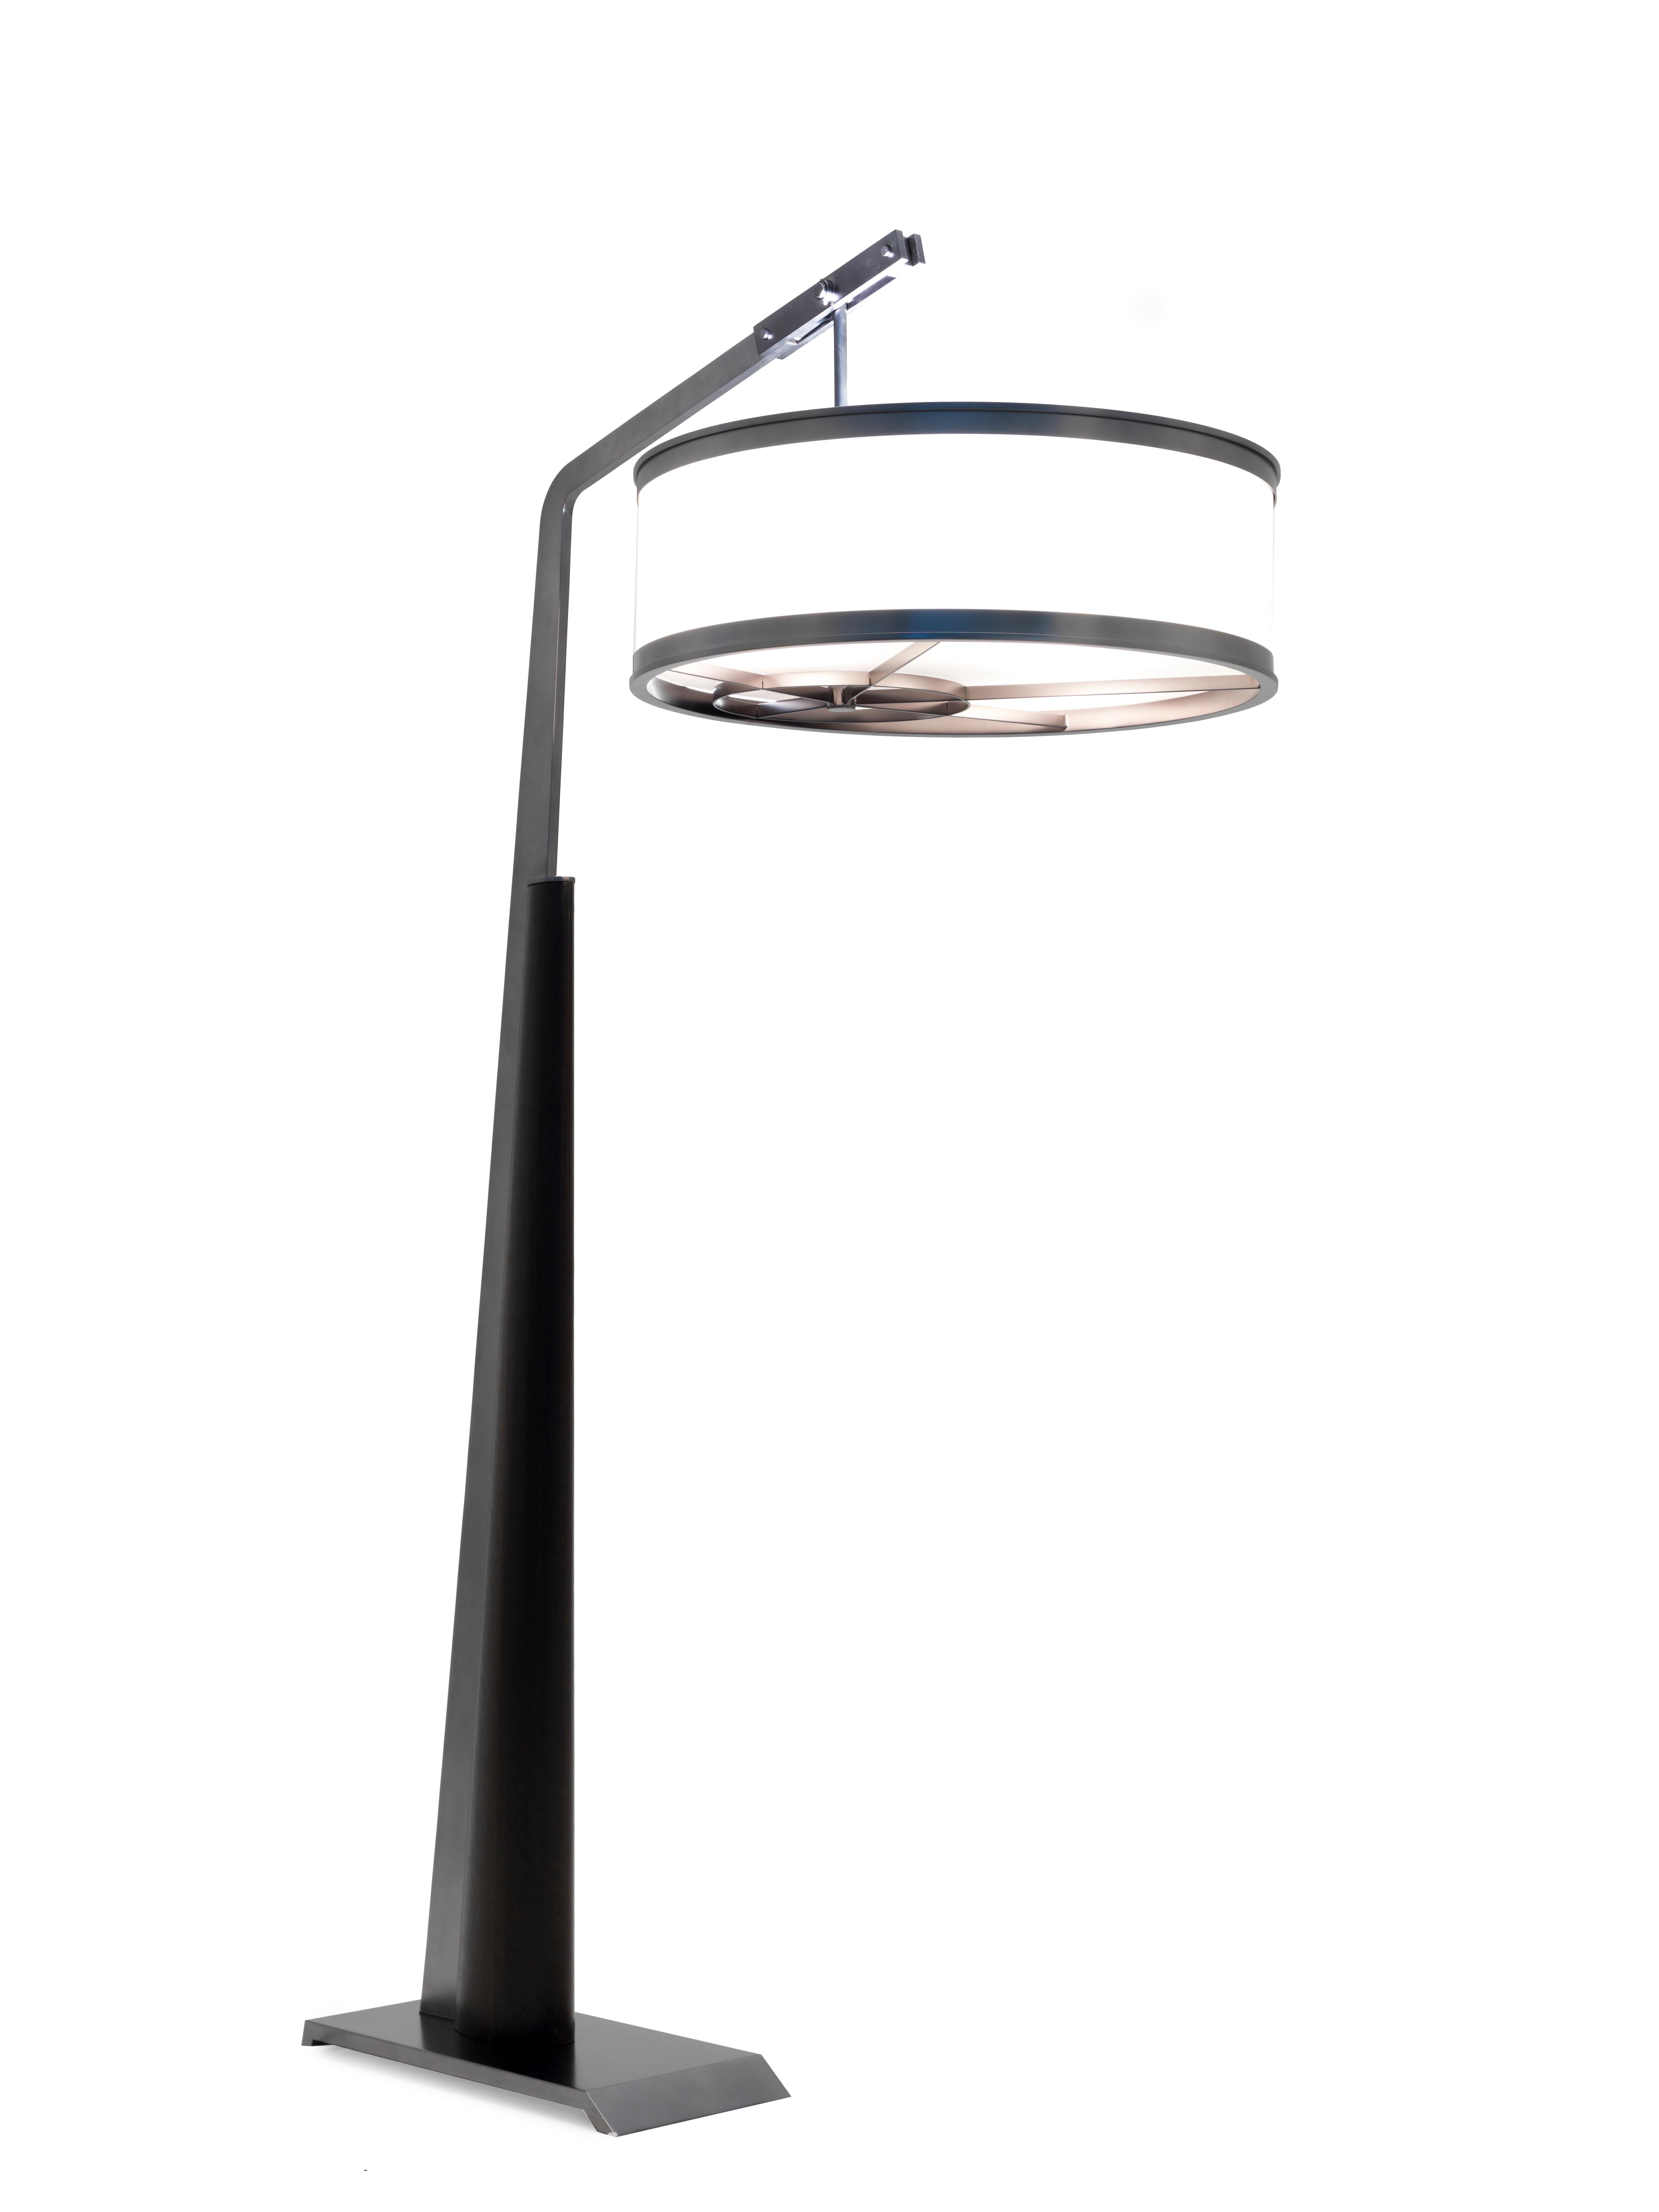 Mintaka Modern Architectural Floor Lamp with Art-Deco Vibes For Sale 1